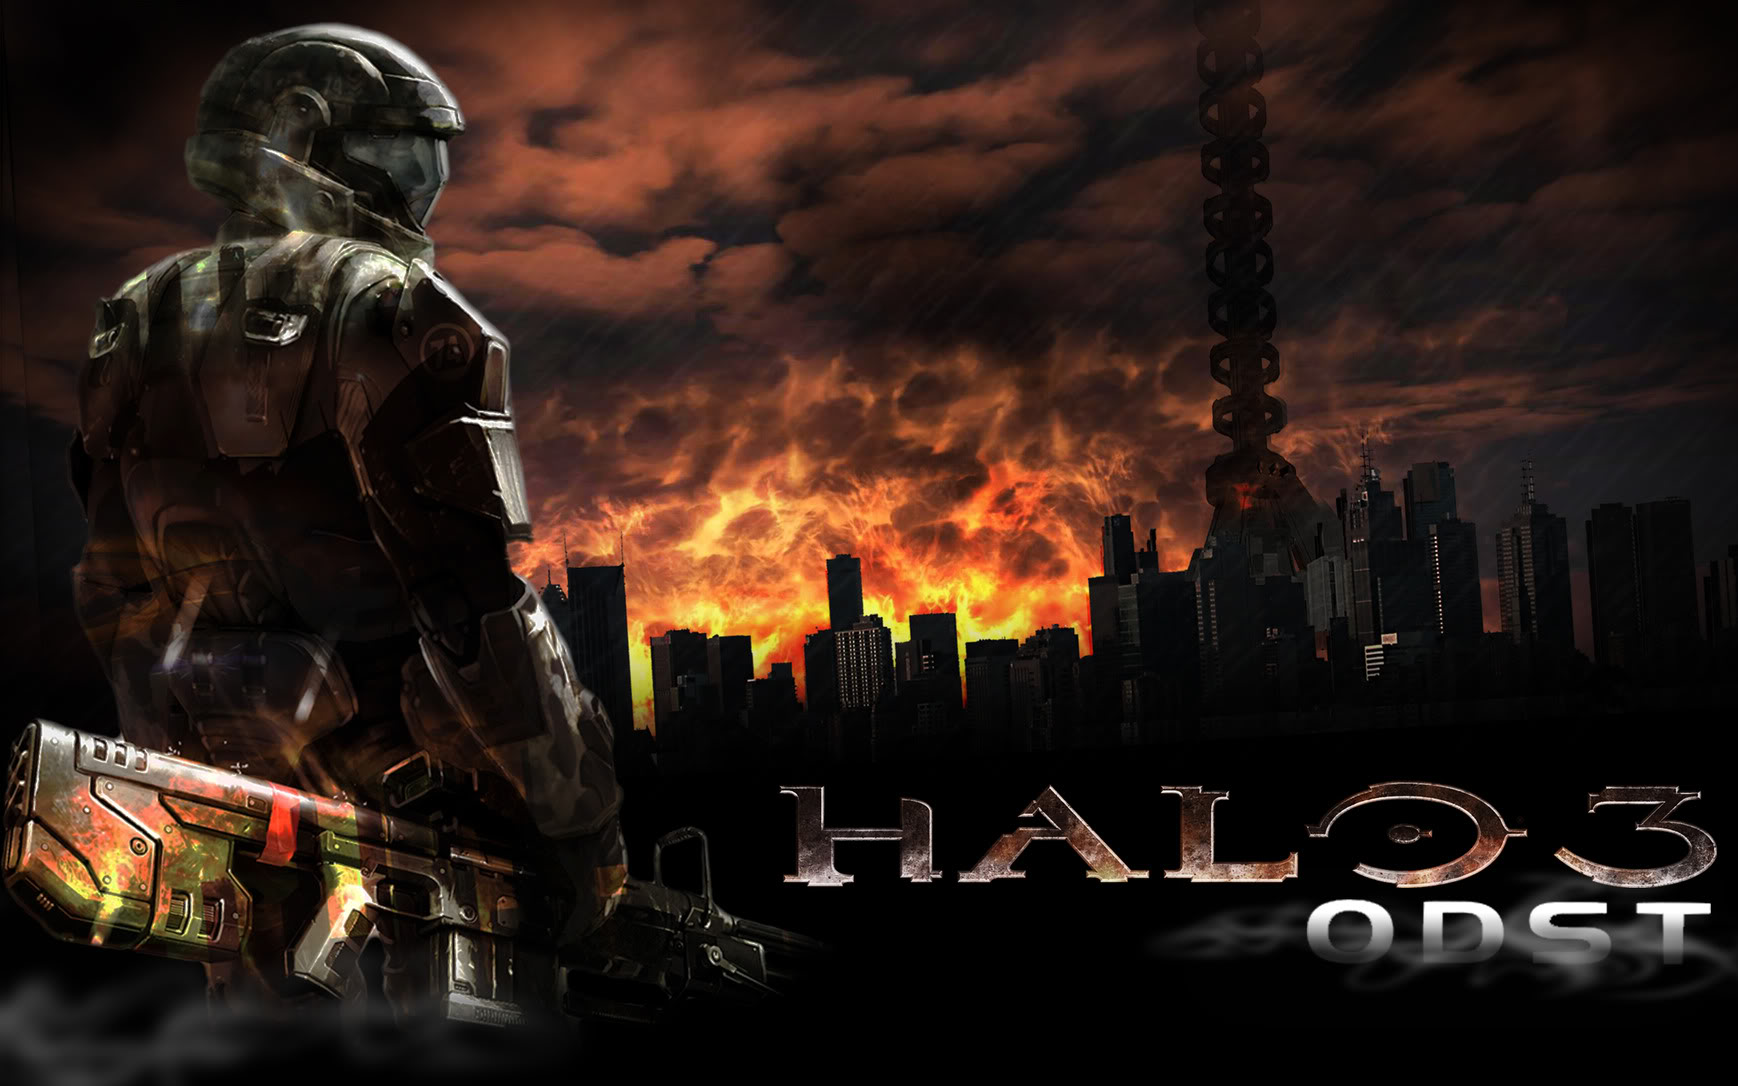 Cool Halo 3 Wallpapers